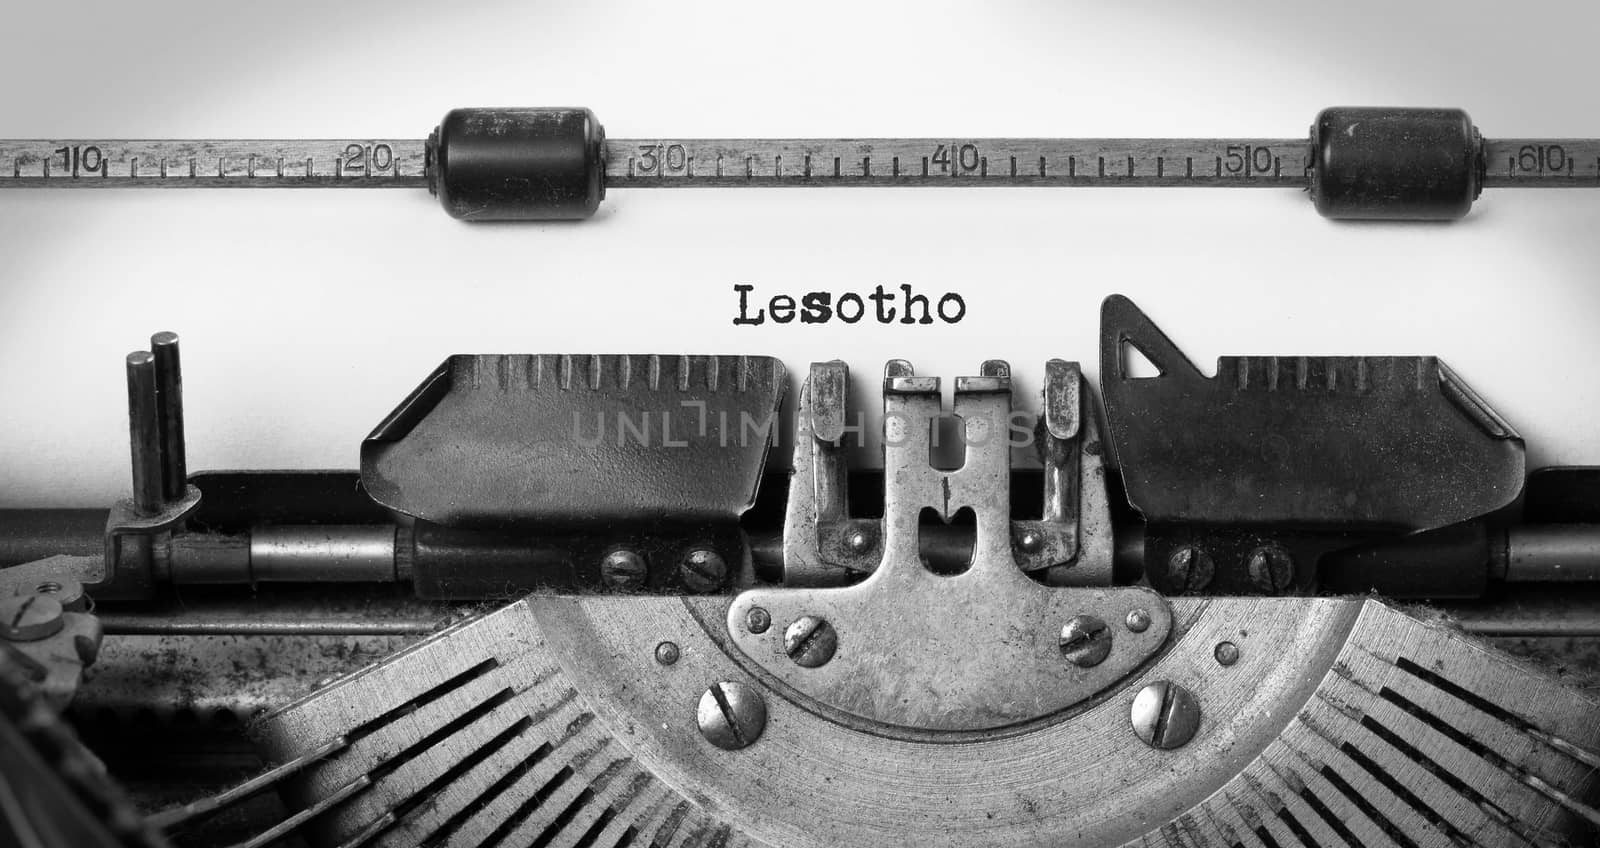 Inscription made by vinrage typewriter, country, Lesotho